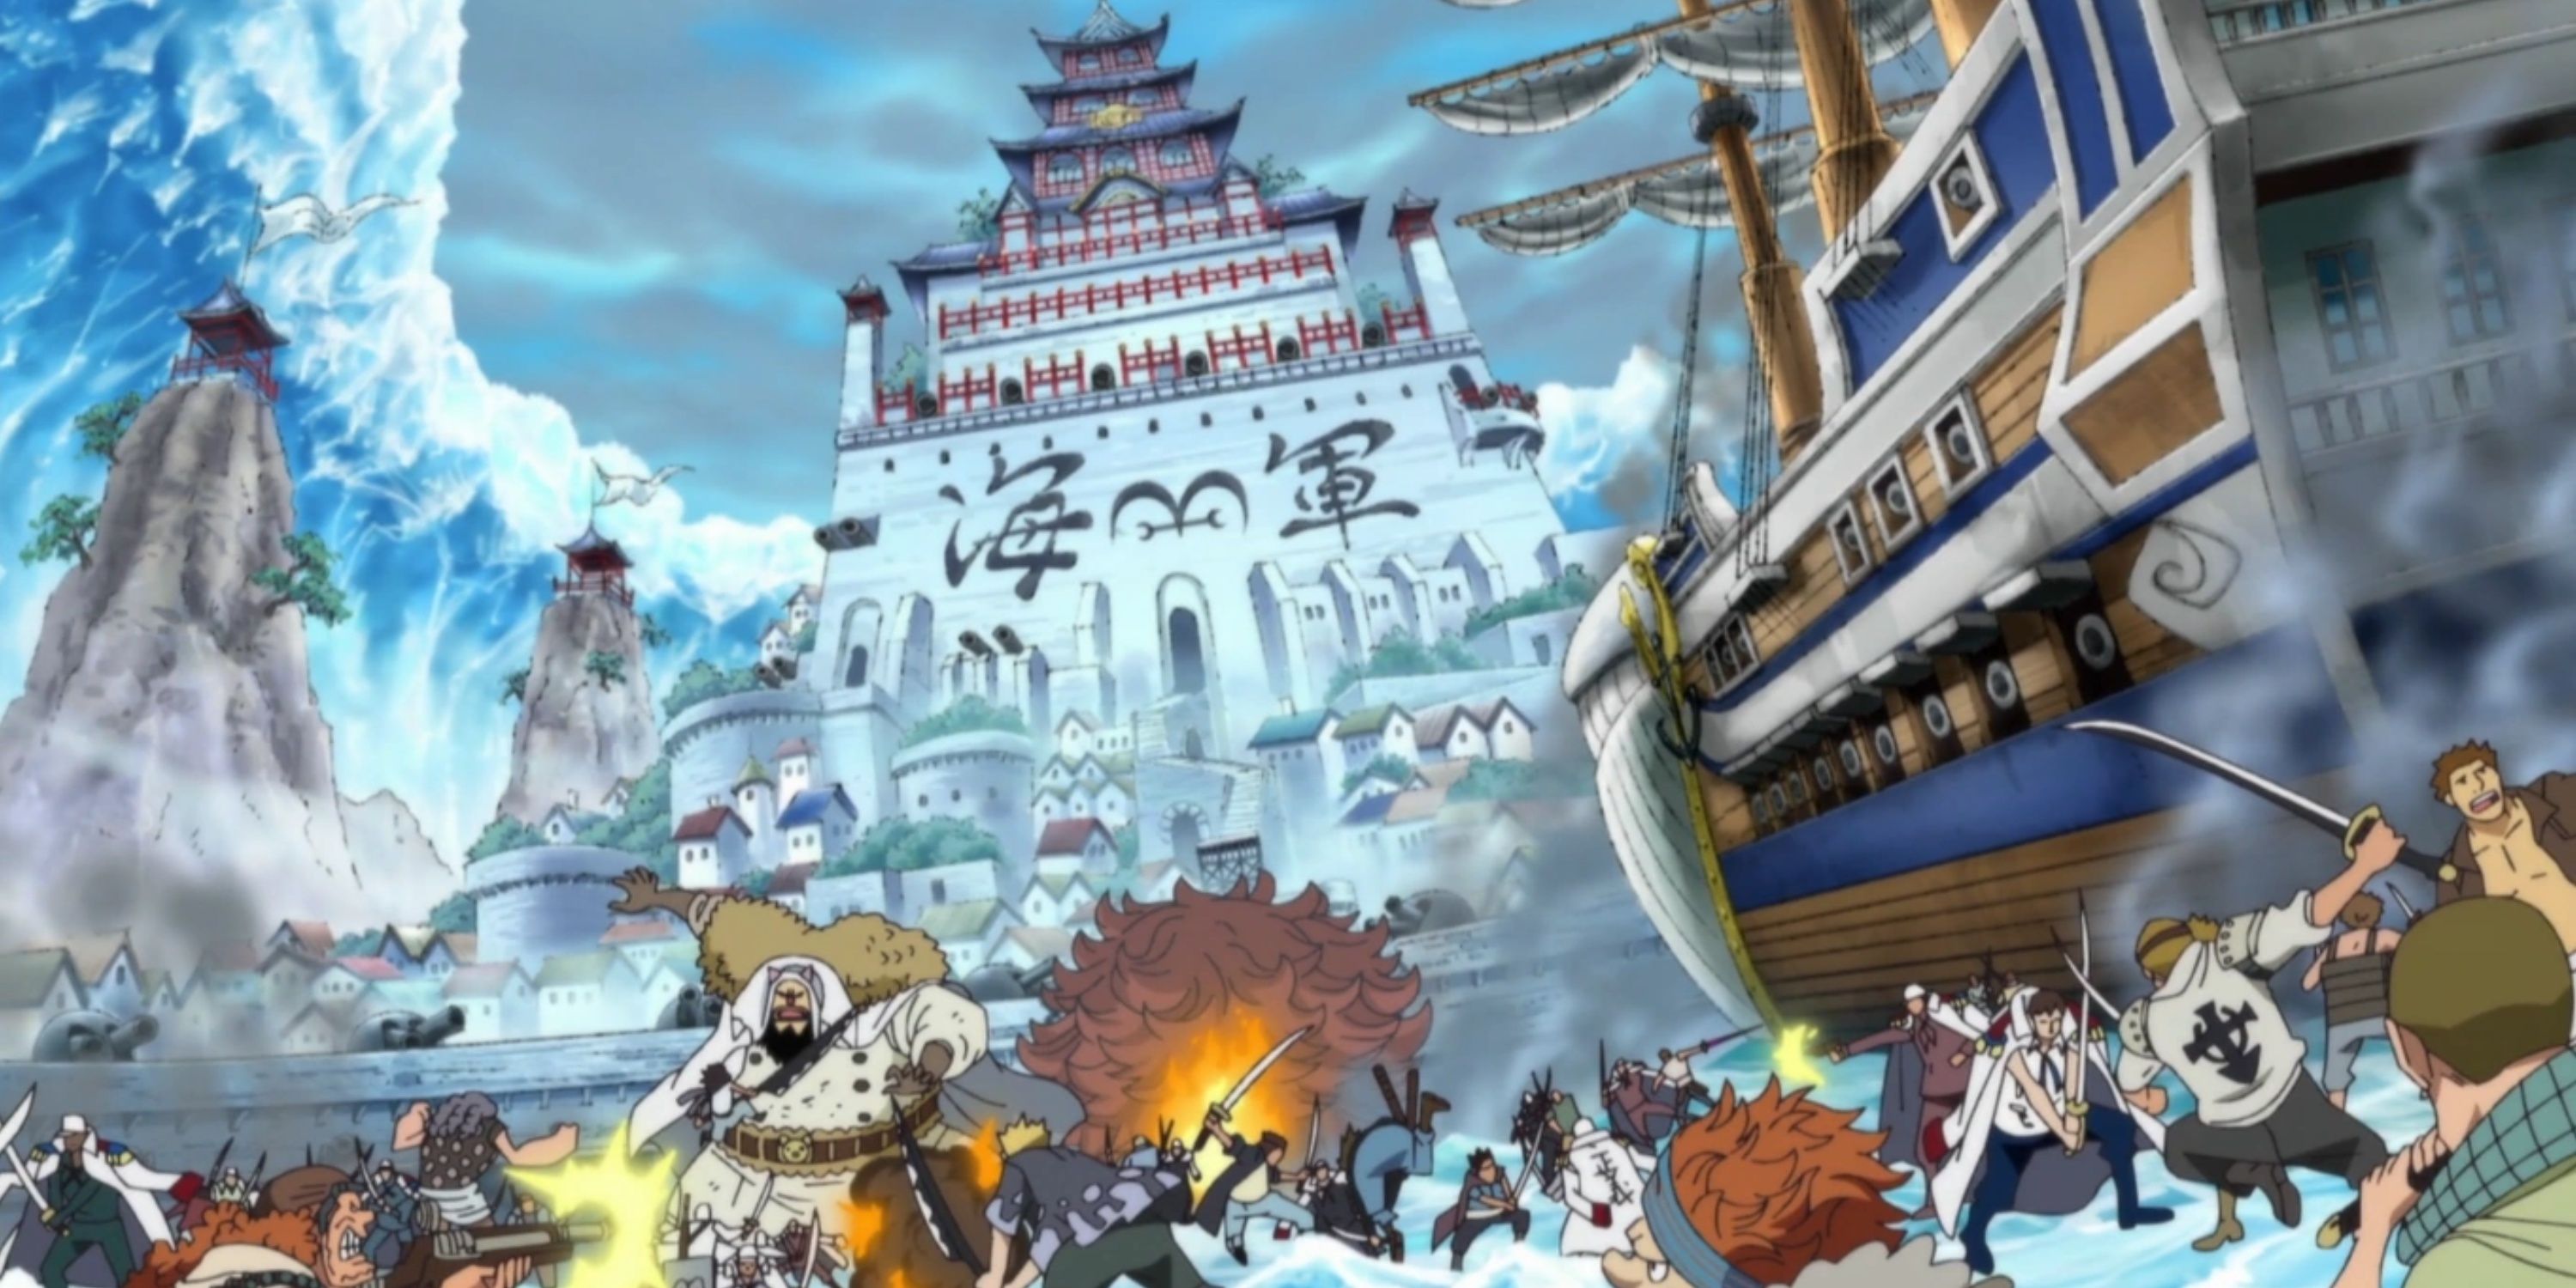 The Summit War at Marineford during the One Piece anime's Marineford Arc